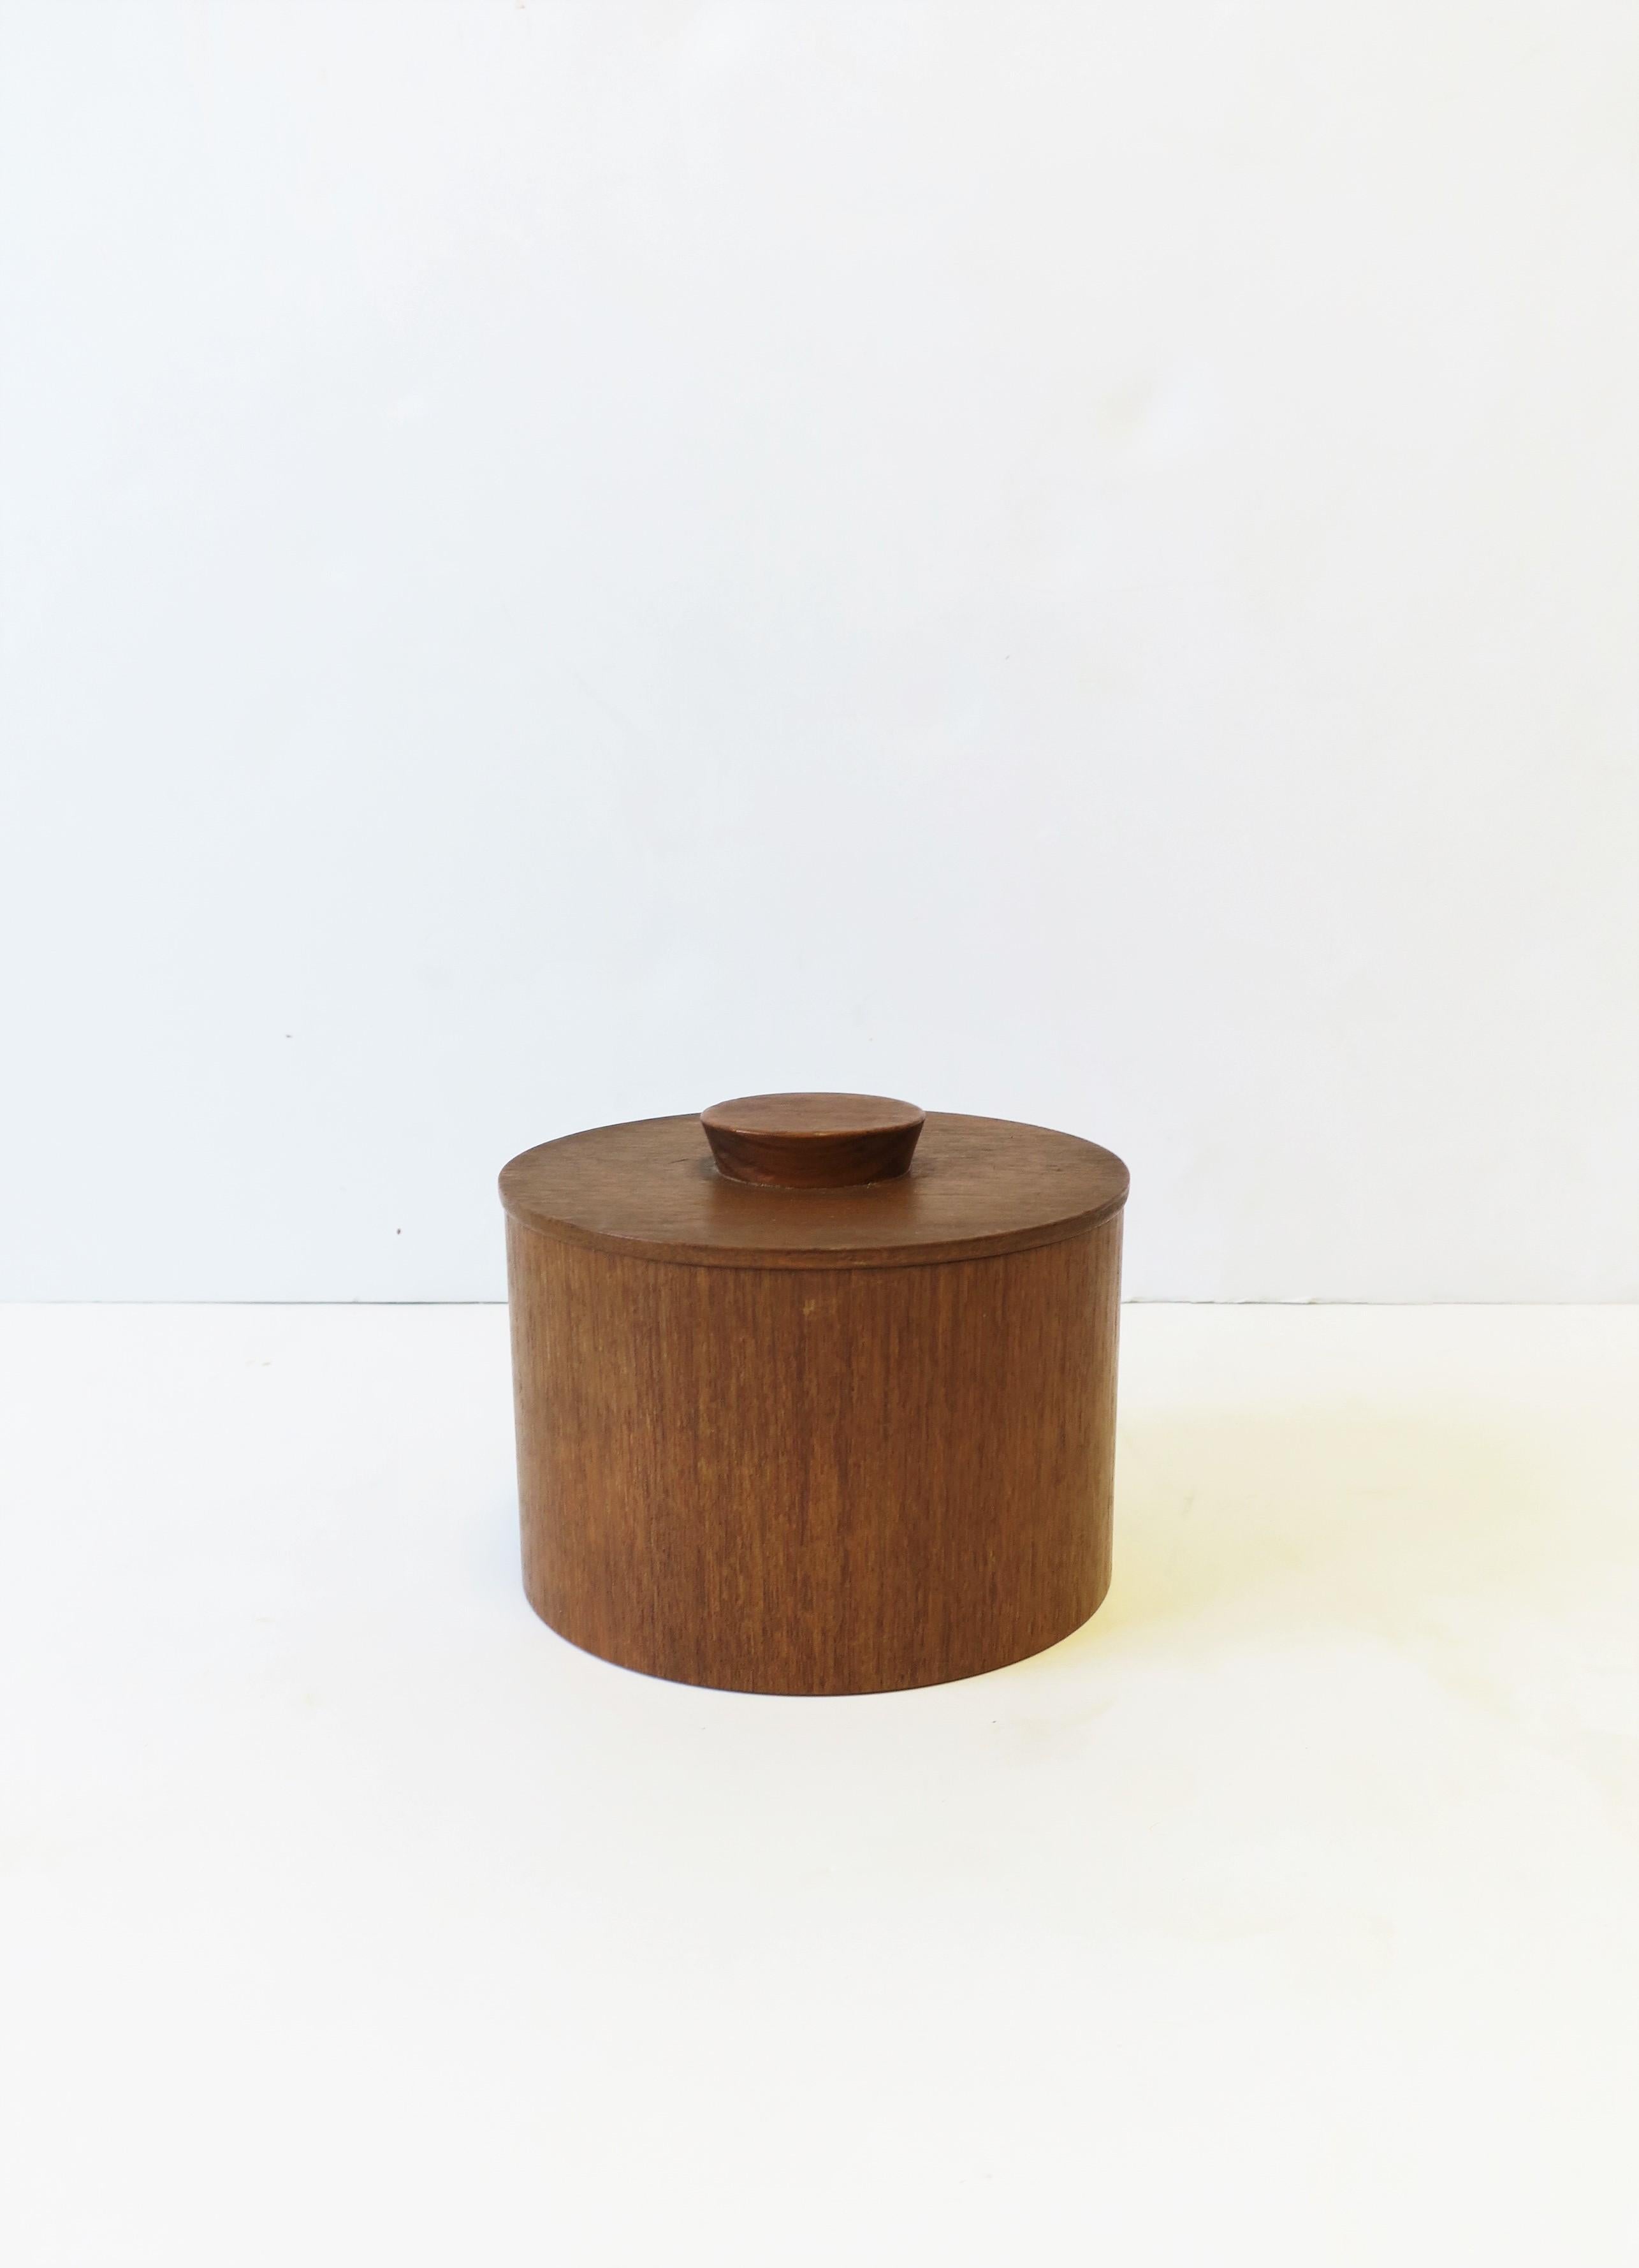 A round Scandinavian Modern teak wood box with lid, circa mid-20th century, Scandinavia. A great piece for a desk, vanity, closet area, etc. Dimensions: 5